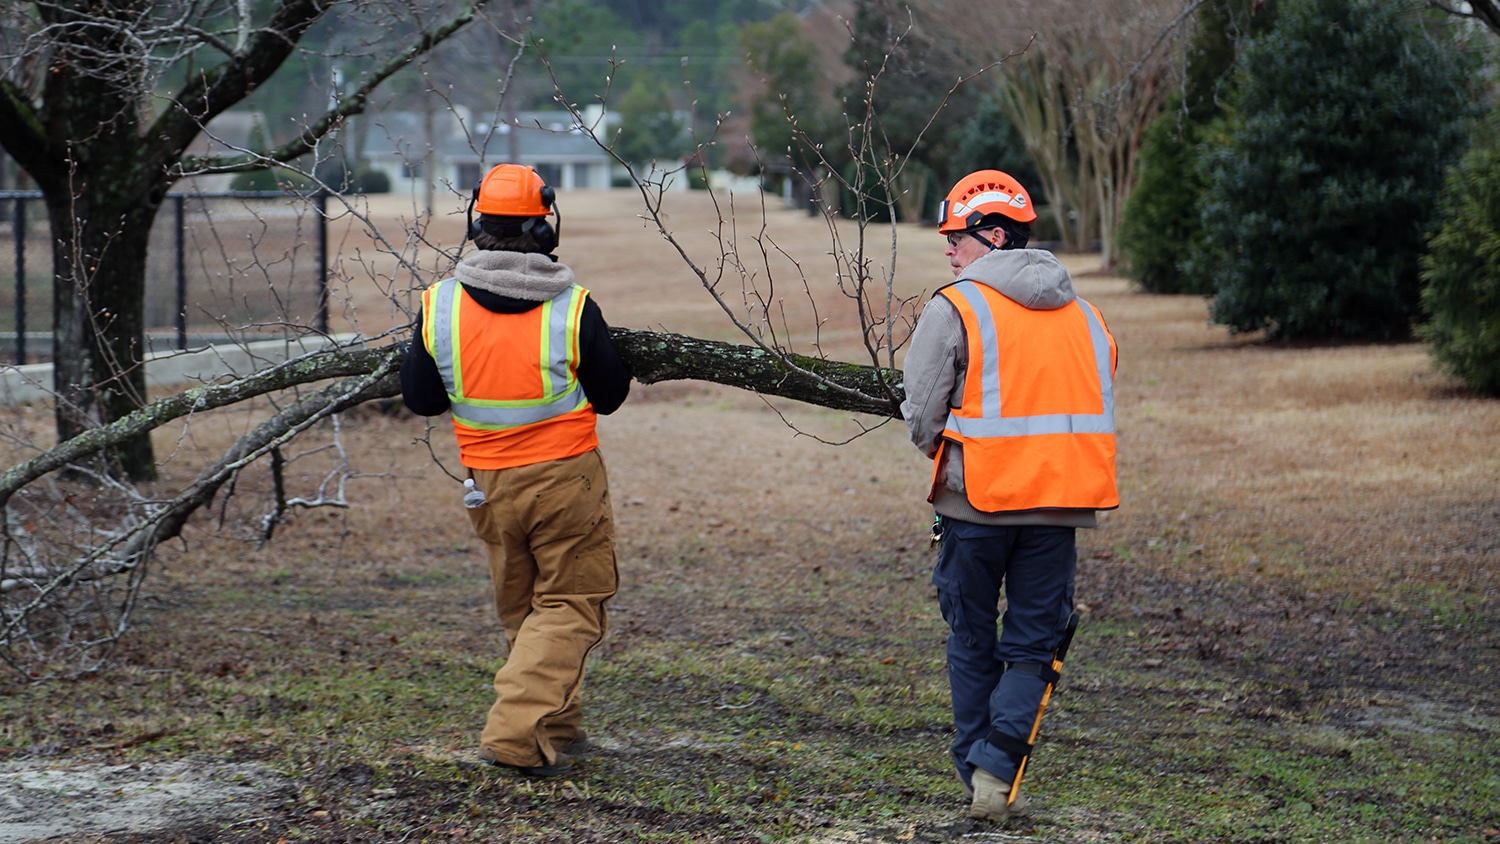 Kelly Blair and a coworker carry a tree limb across a field in Wilmington, North Carolina.